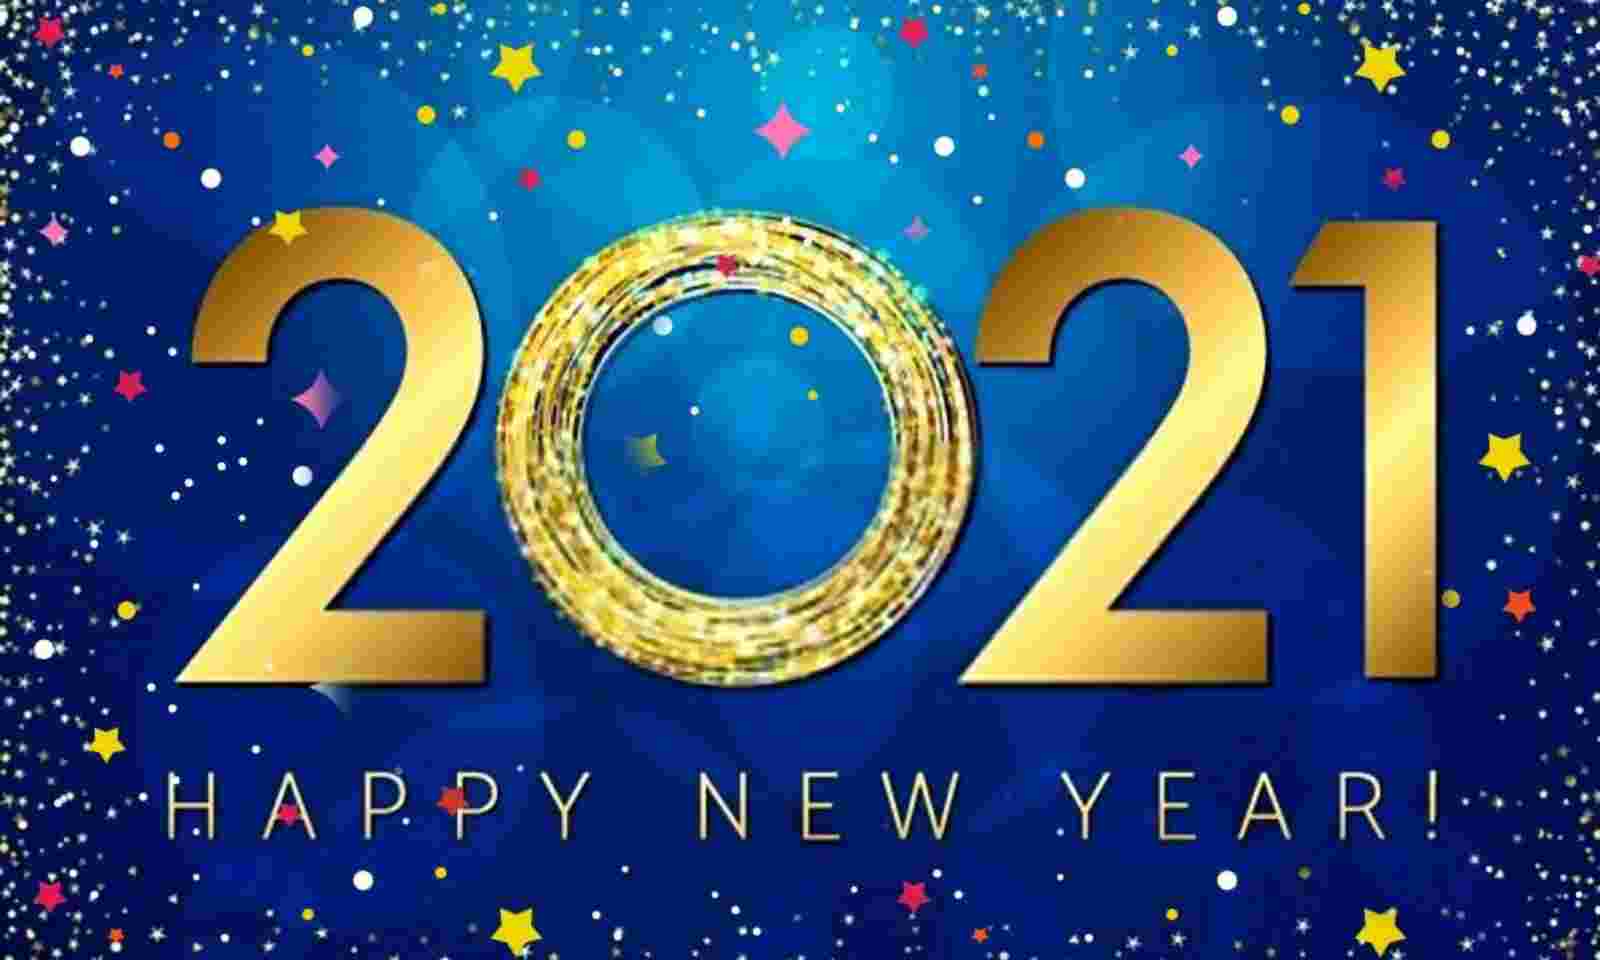 Happy New Year 2021: Wishes, Messages, SMS, WhatsApp Status and Images